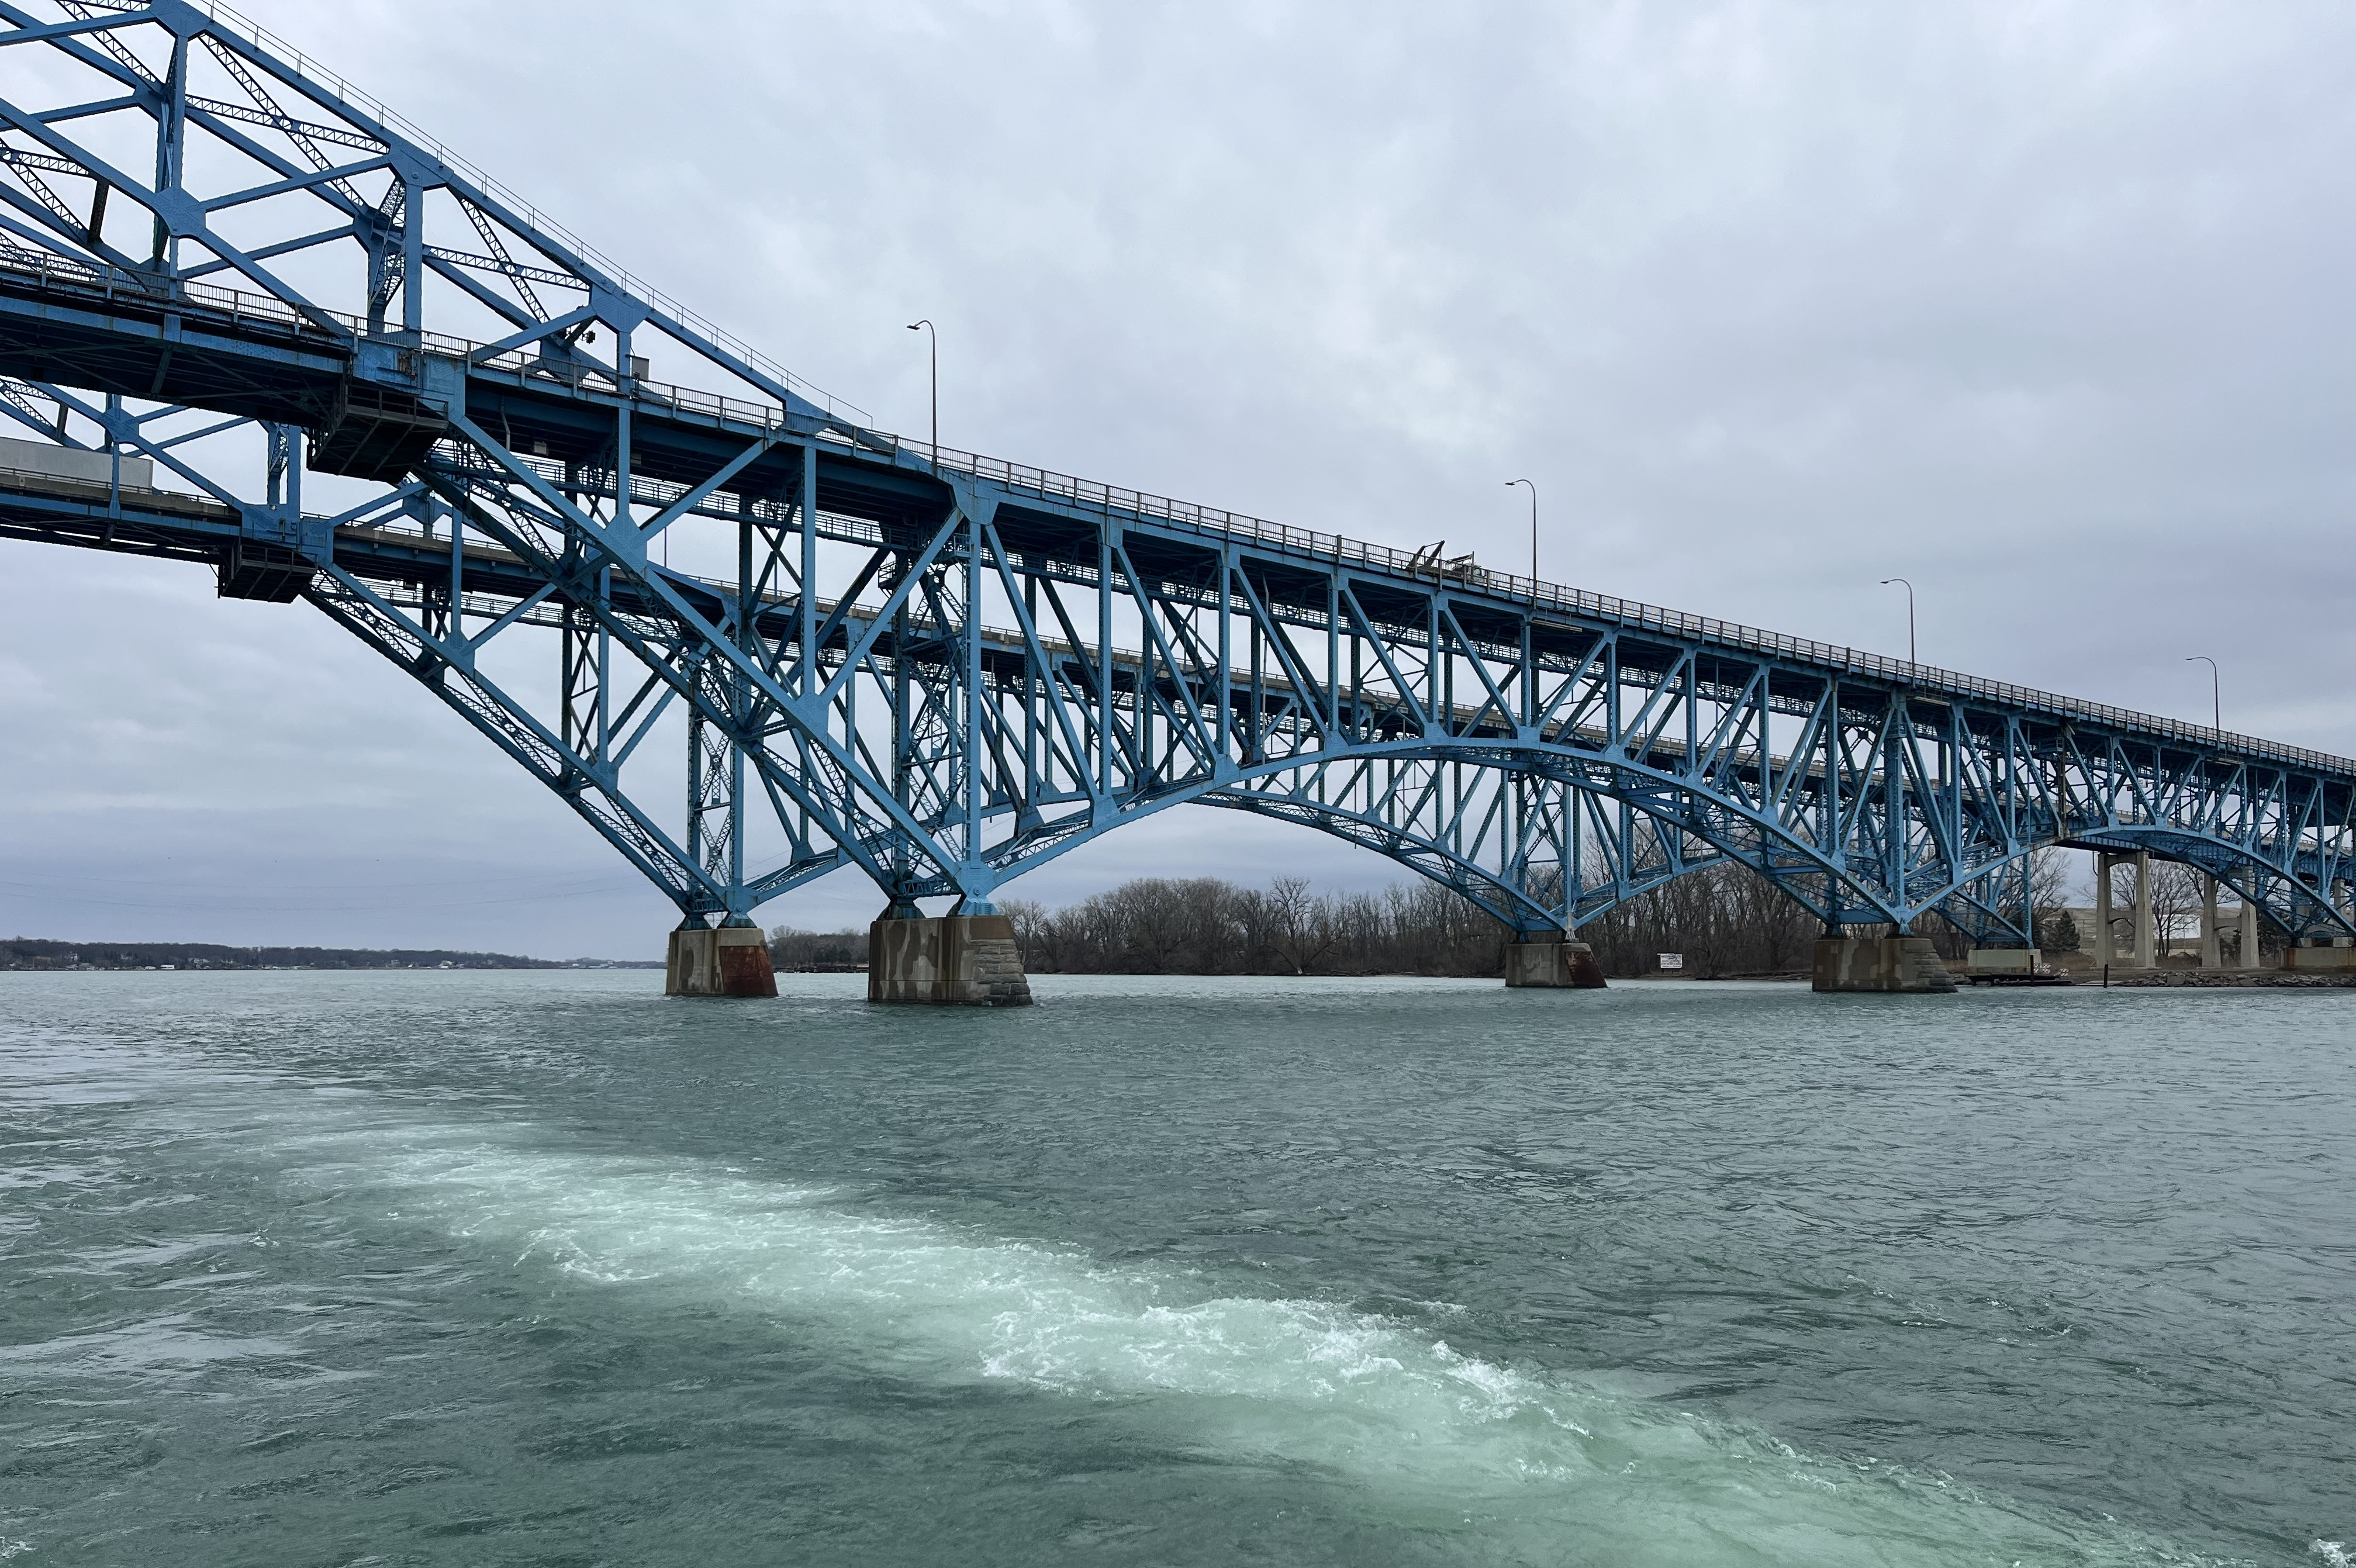 President of CRED4GI (Coalition for Responsible Economic Development for Grand Island) CJ Rayhill speaks on the Grand Island bridges and their conditions going forward